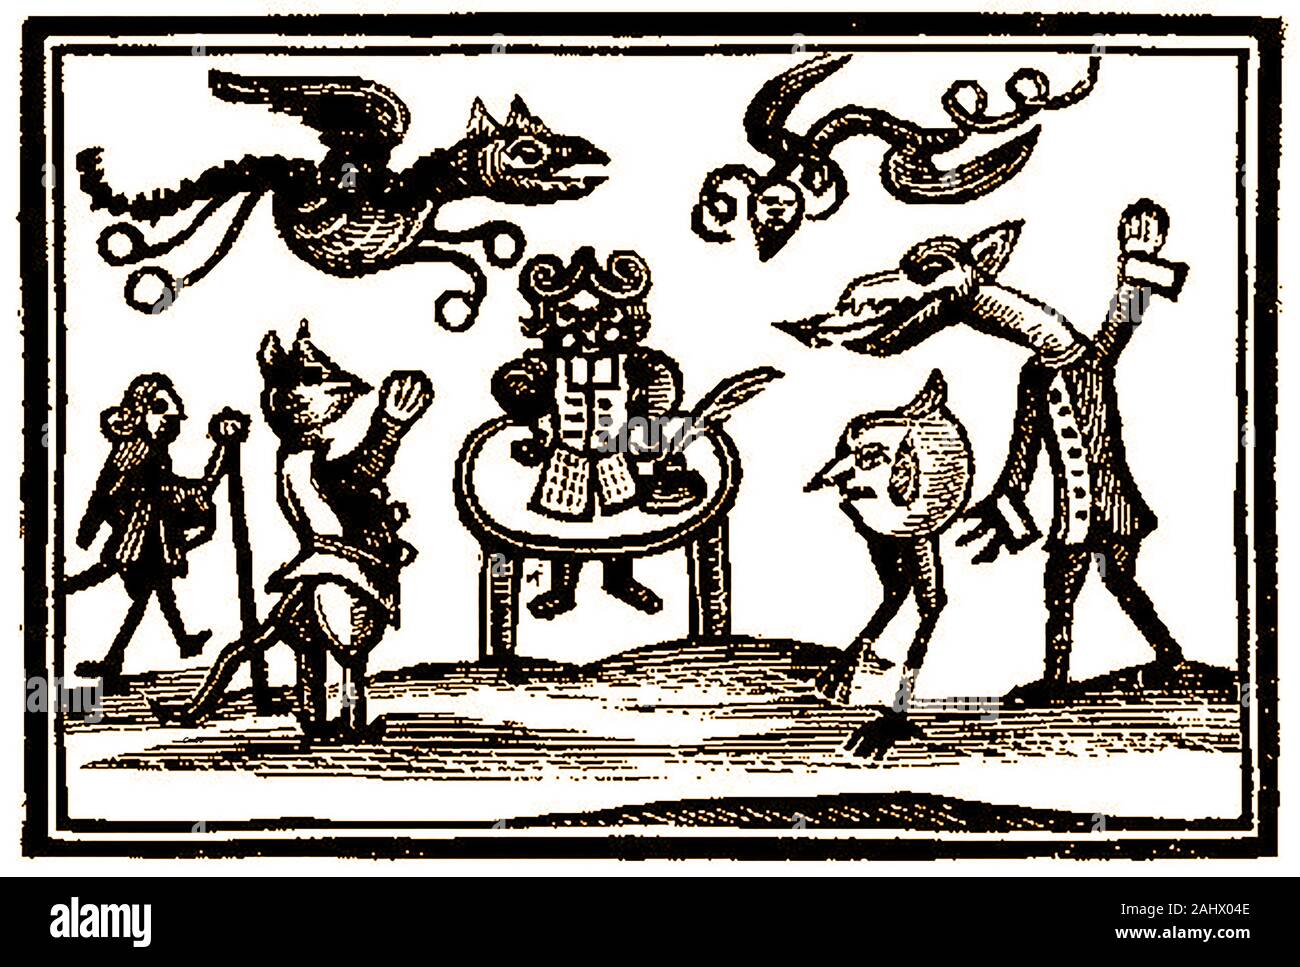 A very early woodcut engraving showing gremlins, dragons, goblins and other magical creatures having been called by a wizard or warlock , sitting centre. Stock Photo